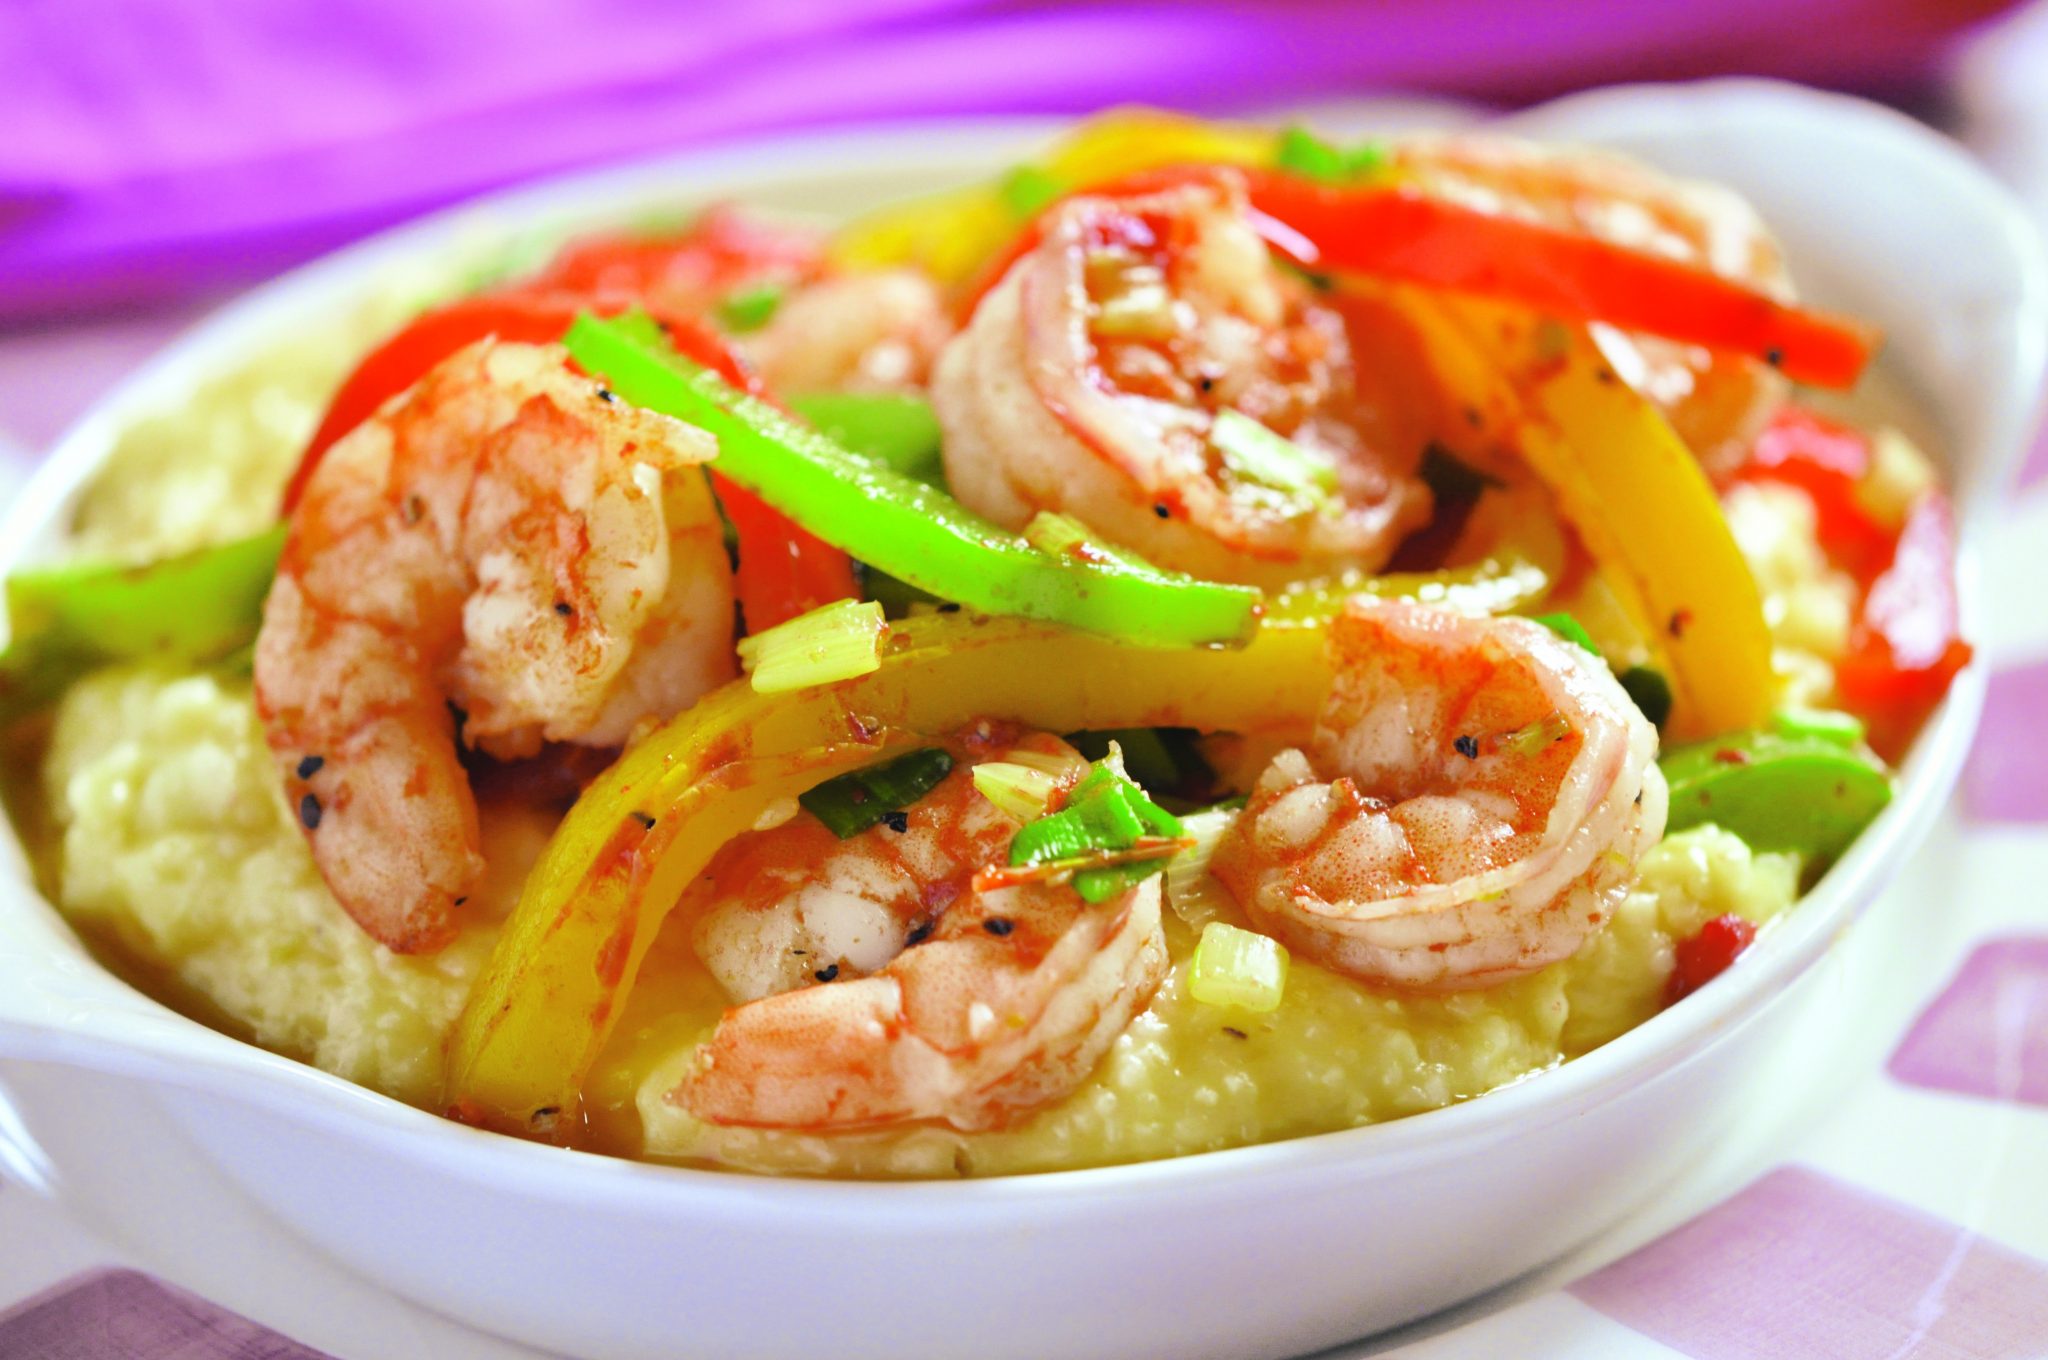 Easy Shrimp And Grits Recipe - Delicious!